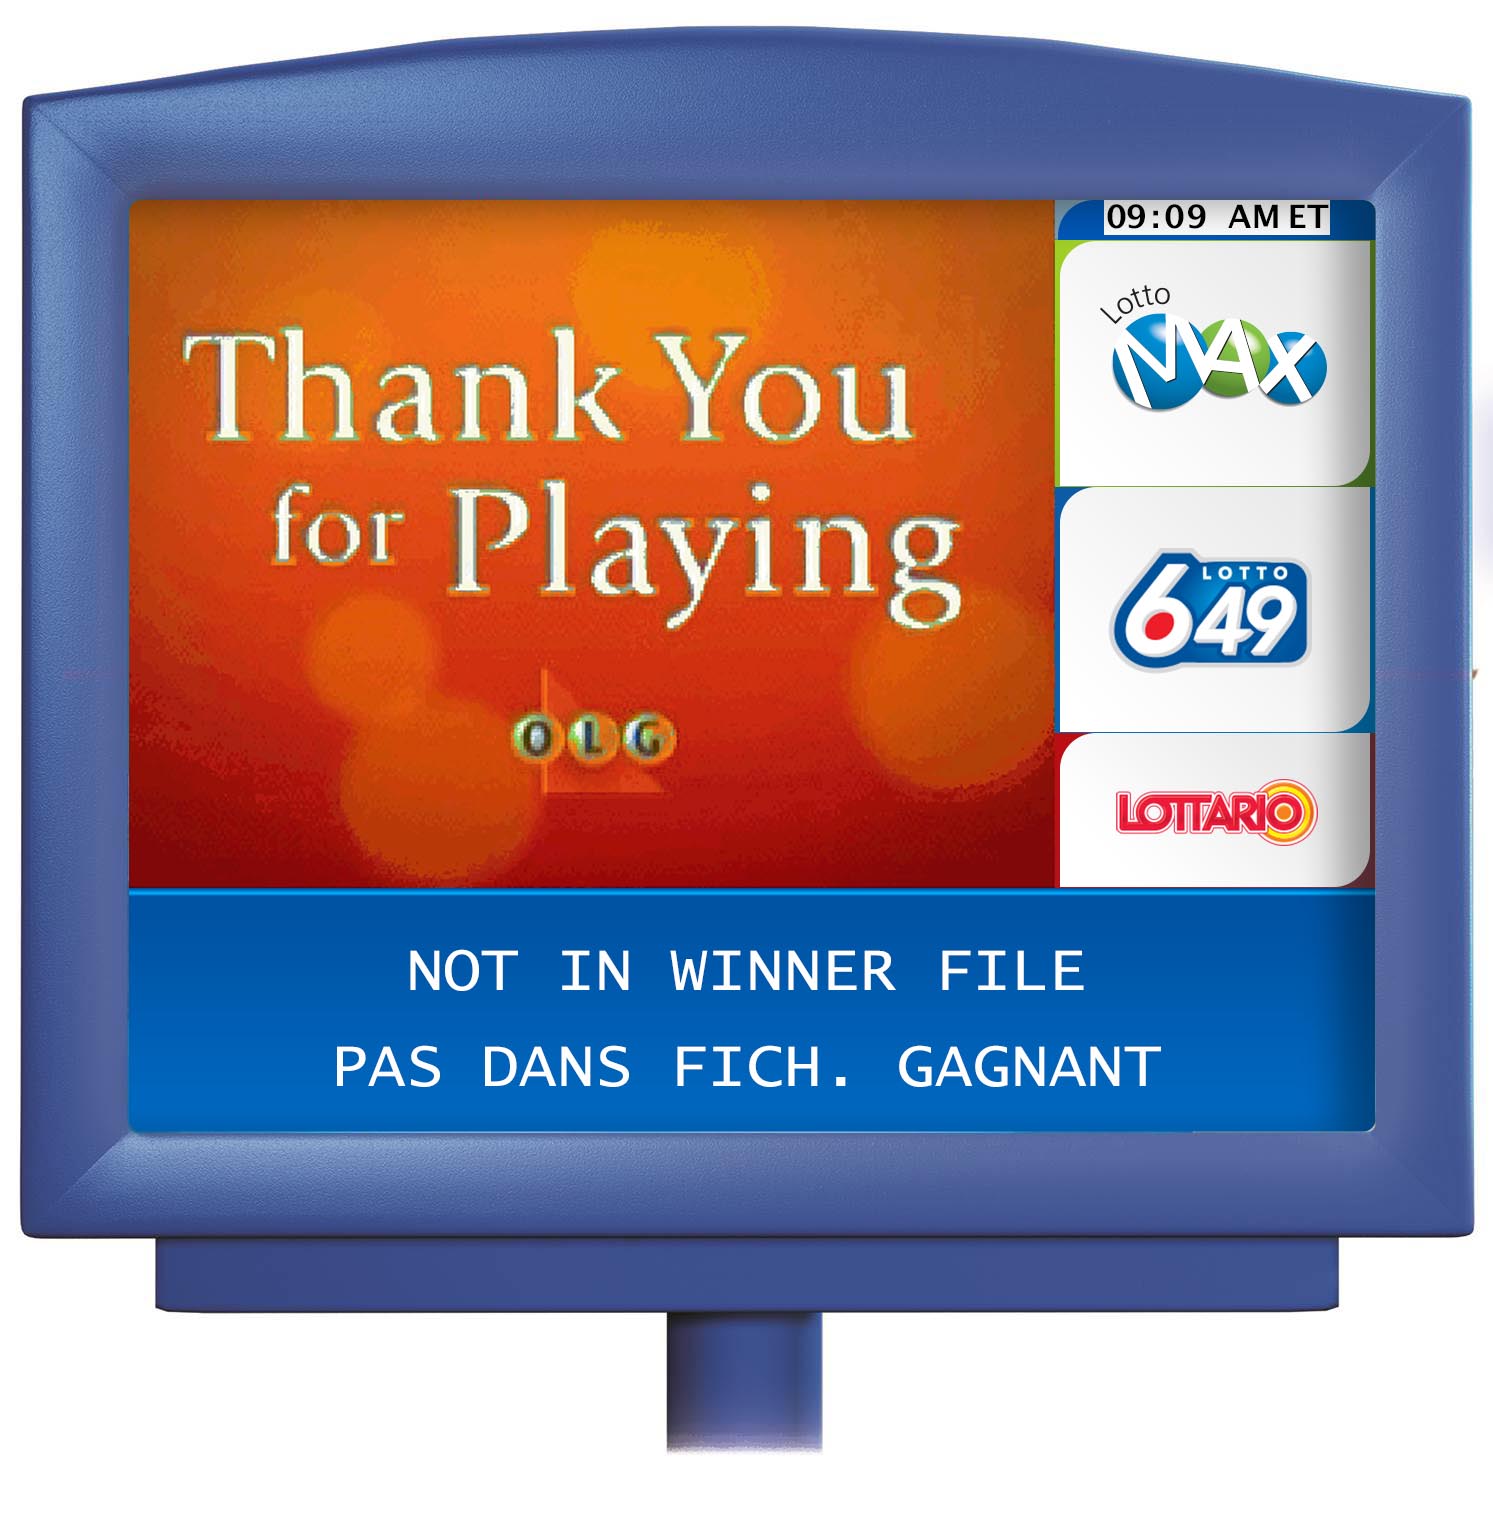 Customer display screen showing “Thank You for Playing”